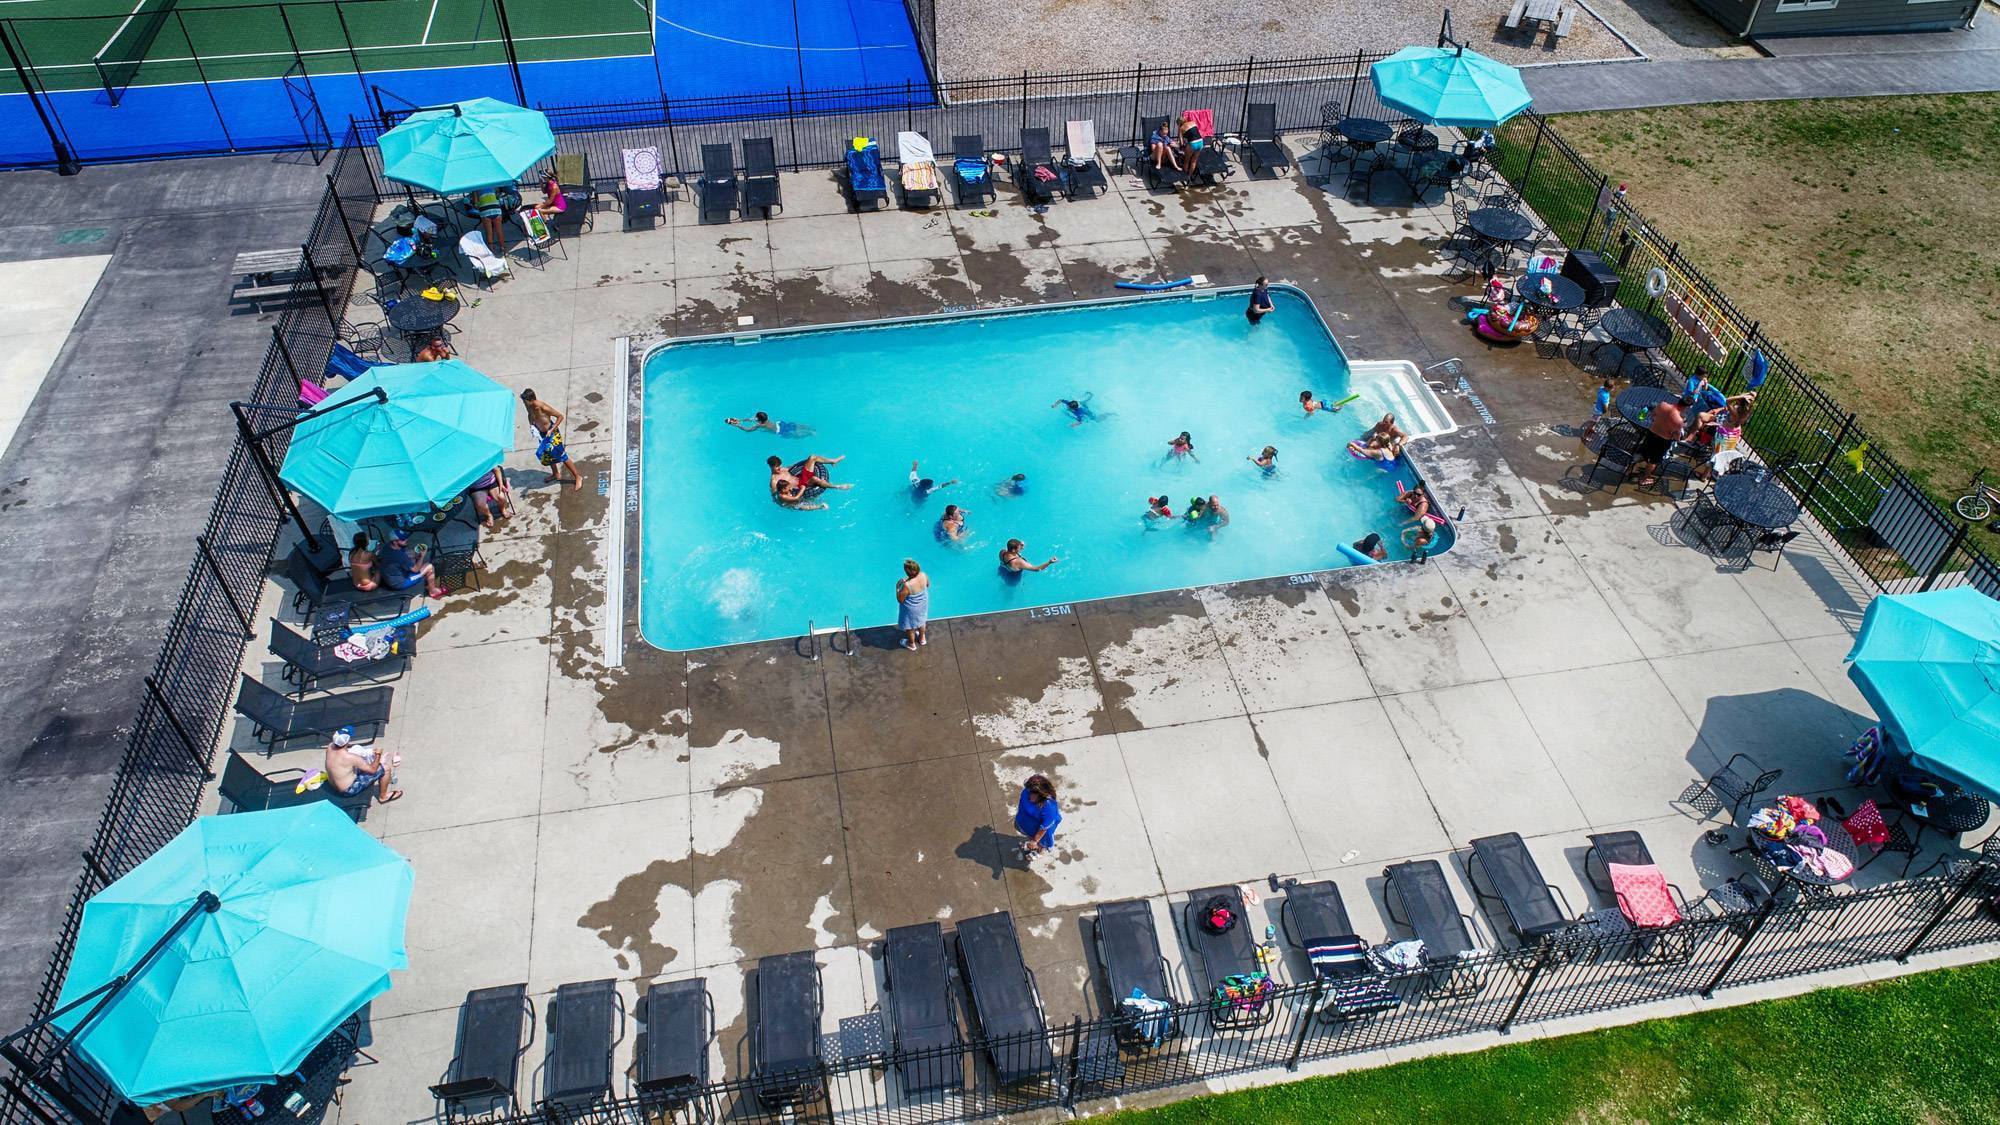 Take a dip in our large family friendly pool!